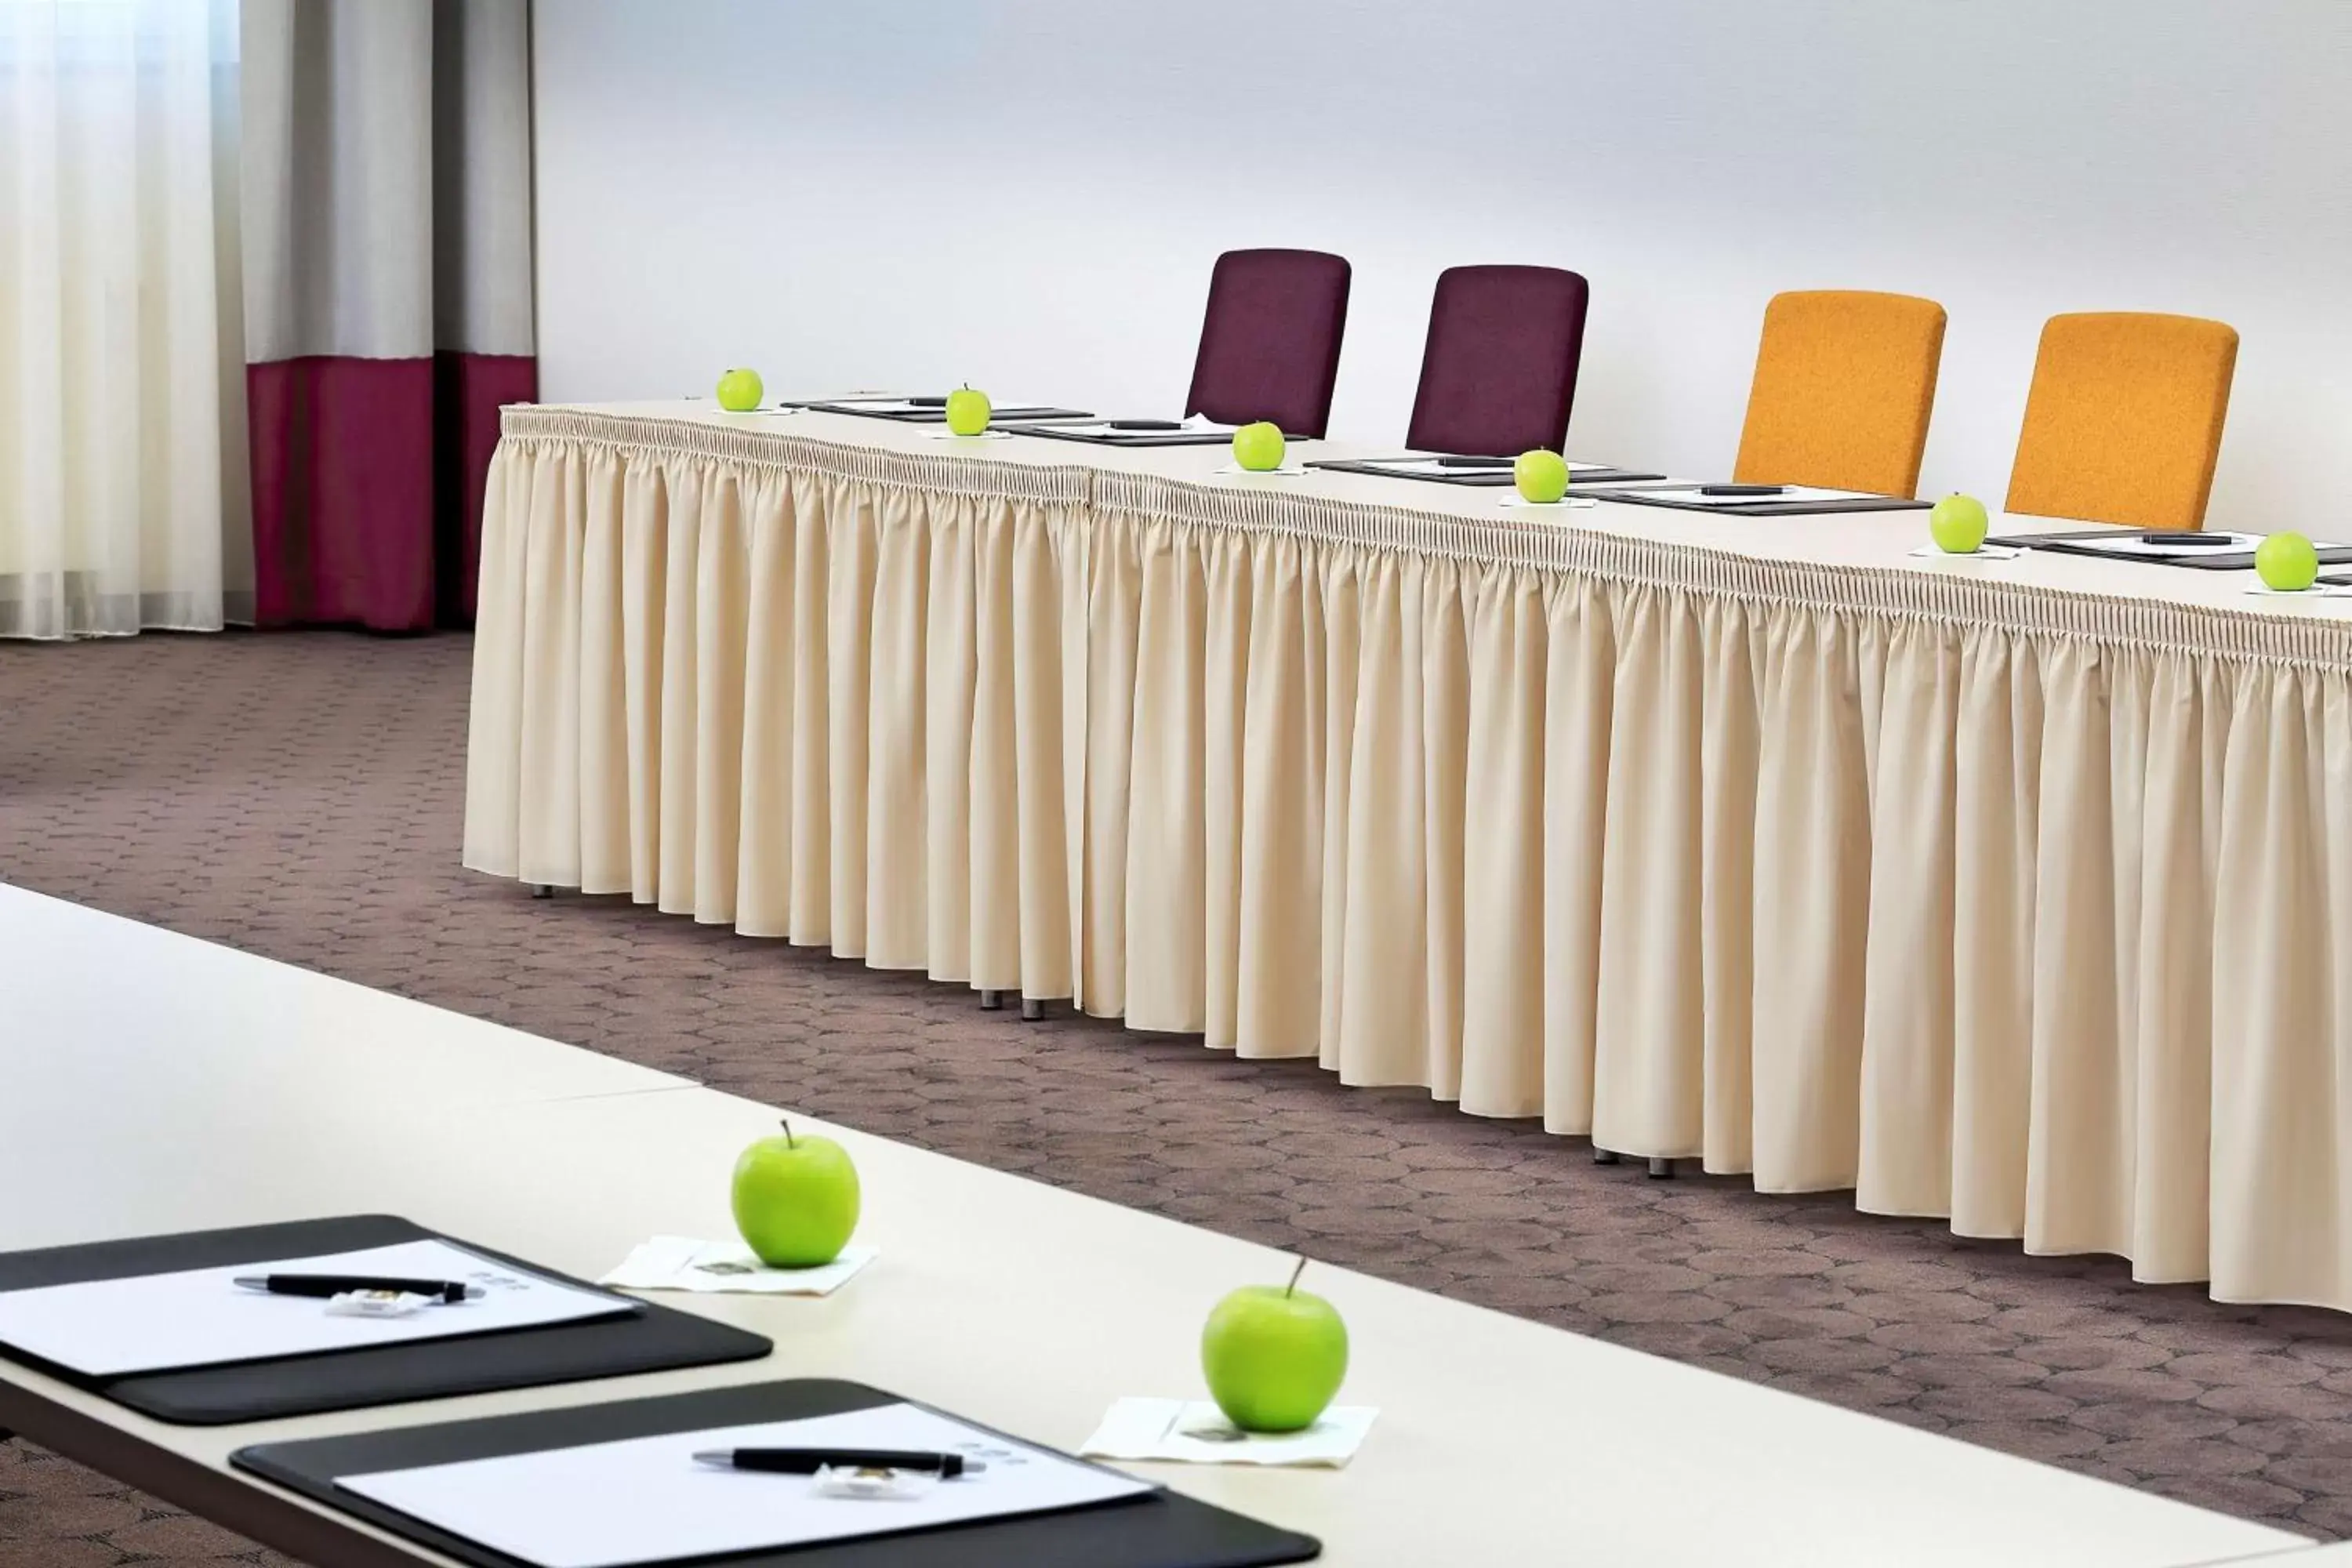 On site, Business Area/Conference Room in Best Western Premier IB Hotel Friedberger Warte